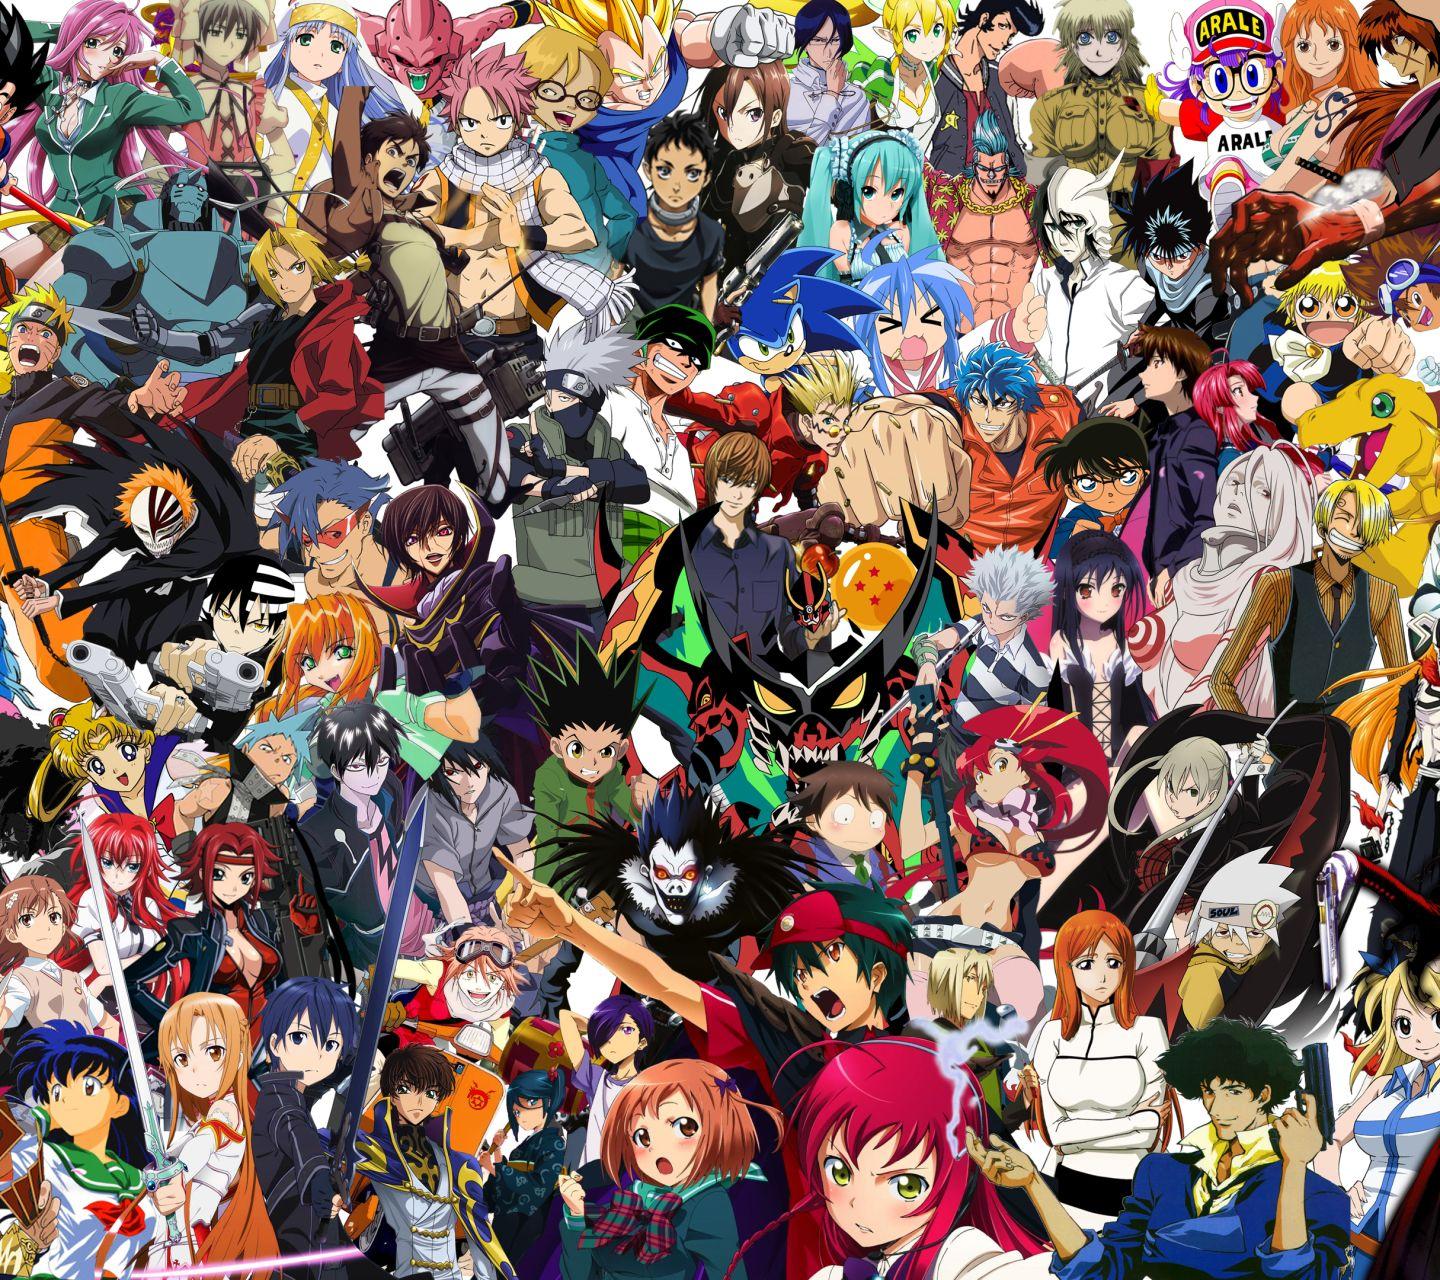 Best Free Anime Streaming Sites to Download Anime Free  Paid